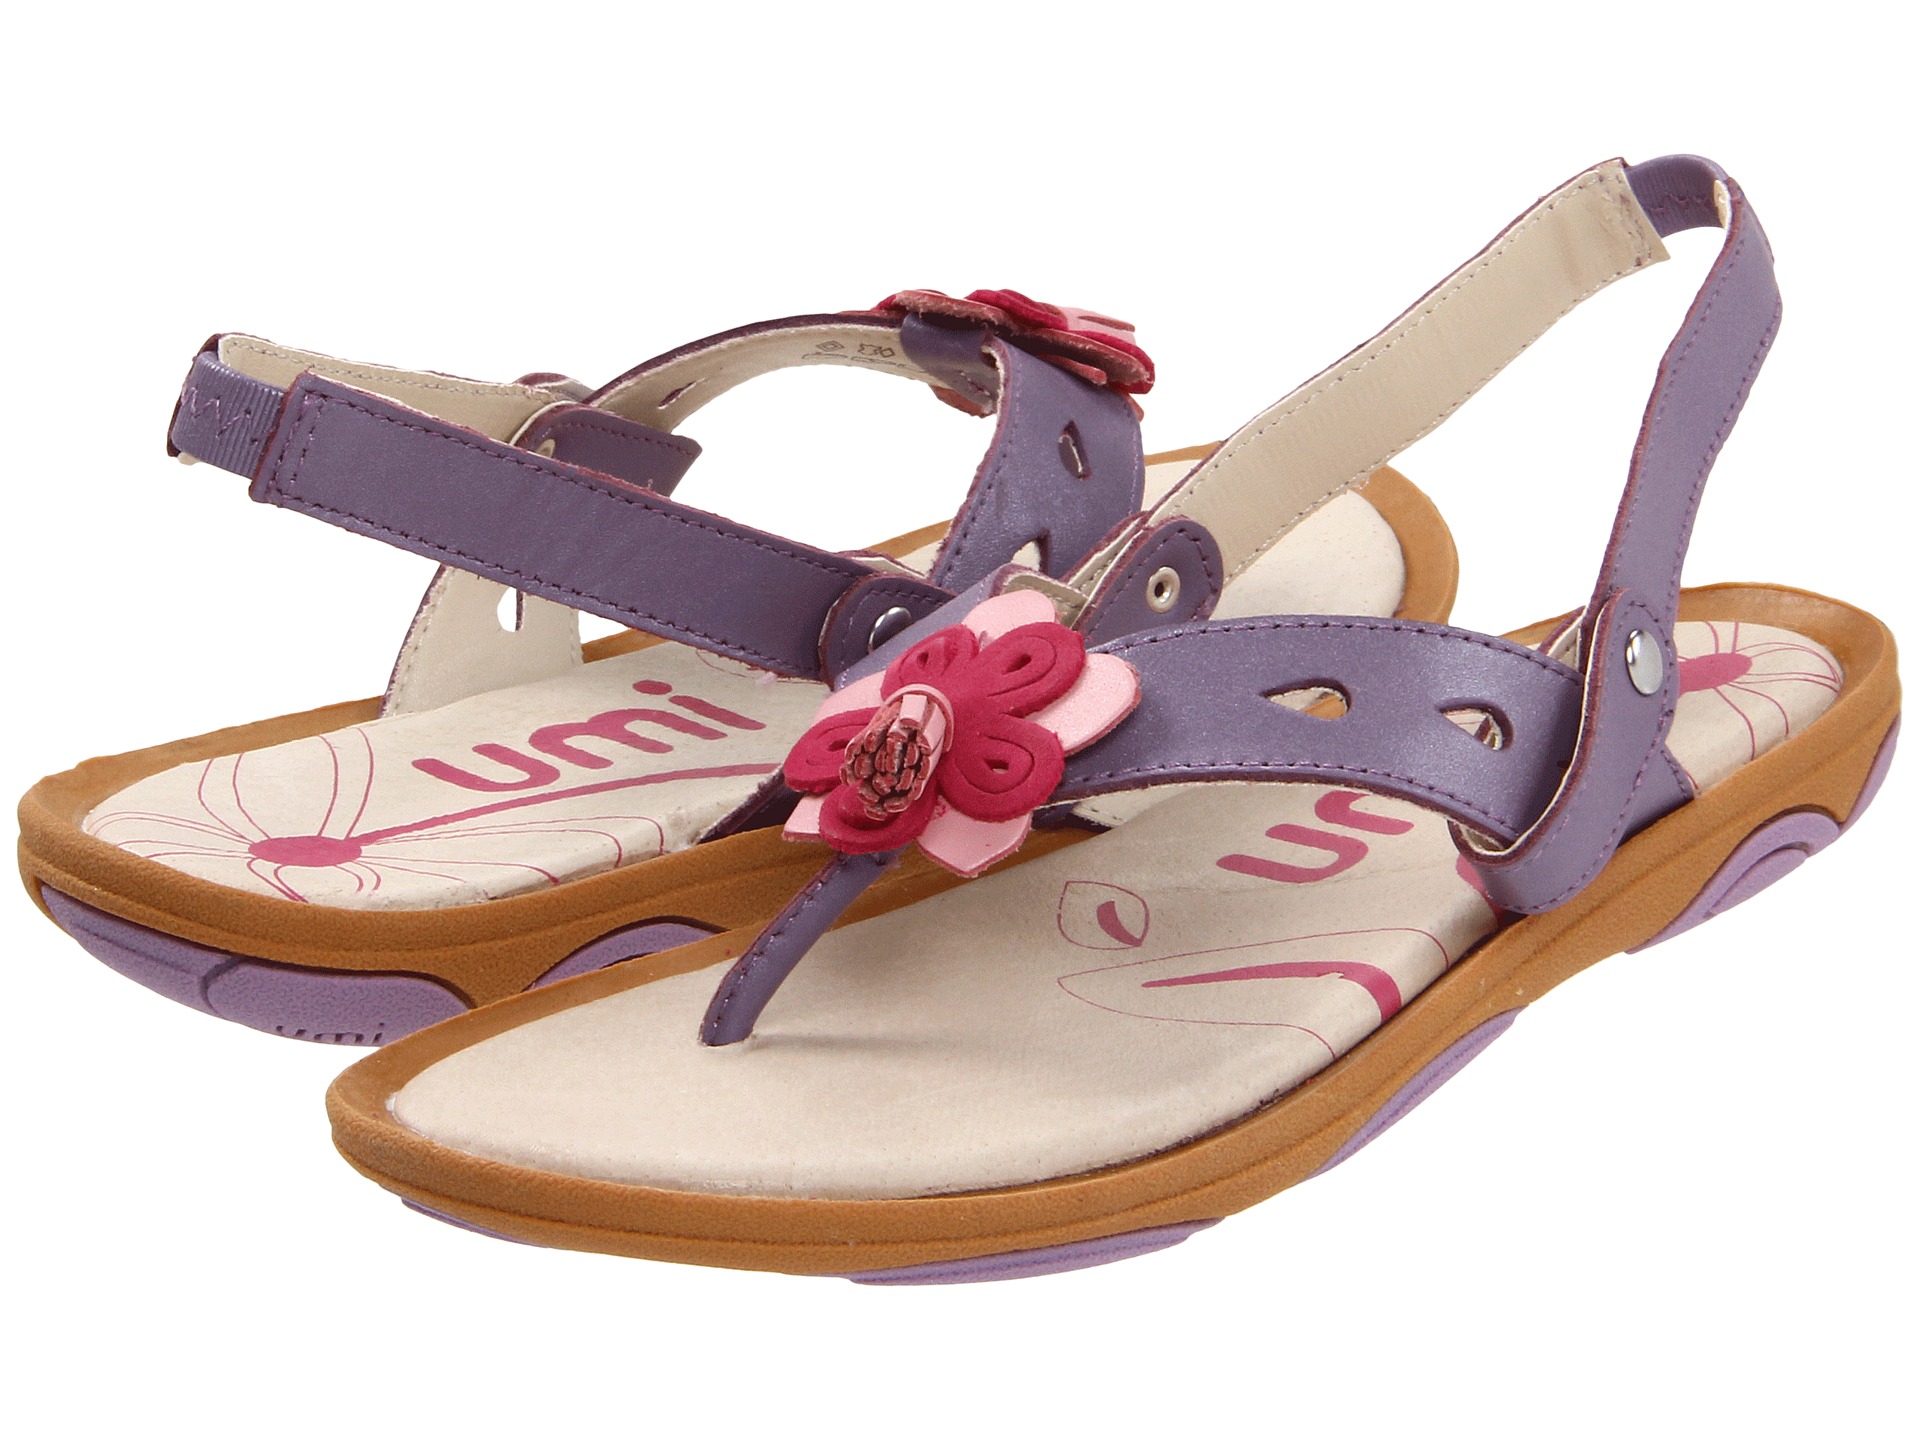 Umi Kids Jaymee (Toddler/Youth) $43.99 ( 20% off MSRP $54.95)